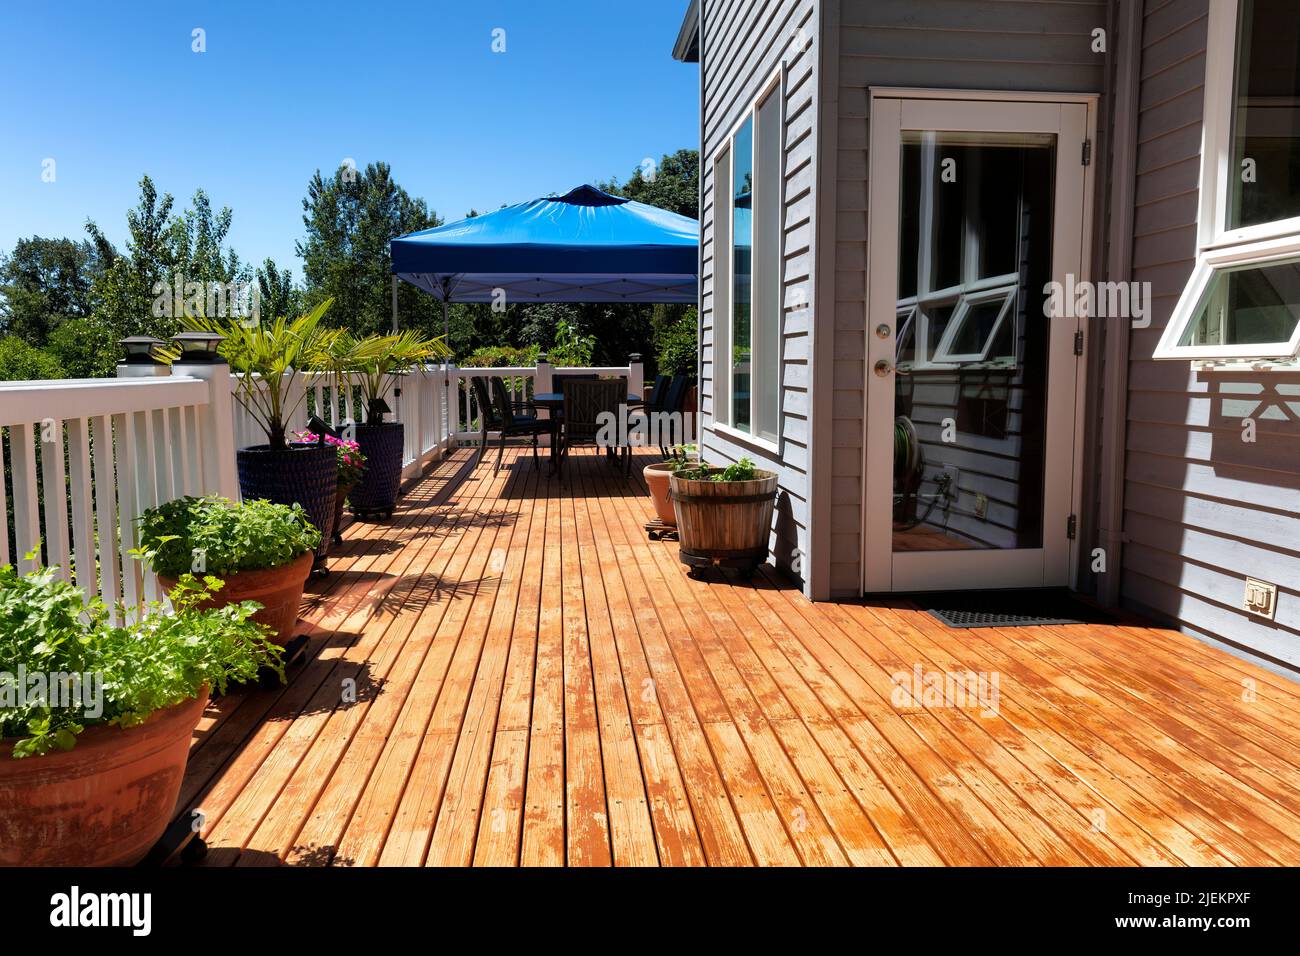 Home wood deck with outdoor furniture and garden backyard during summer Stock Photo